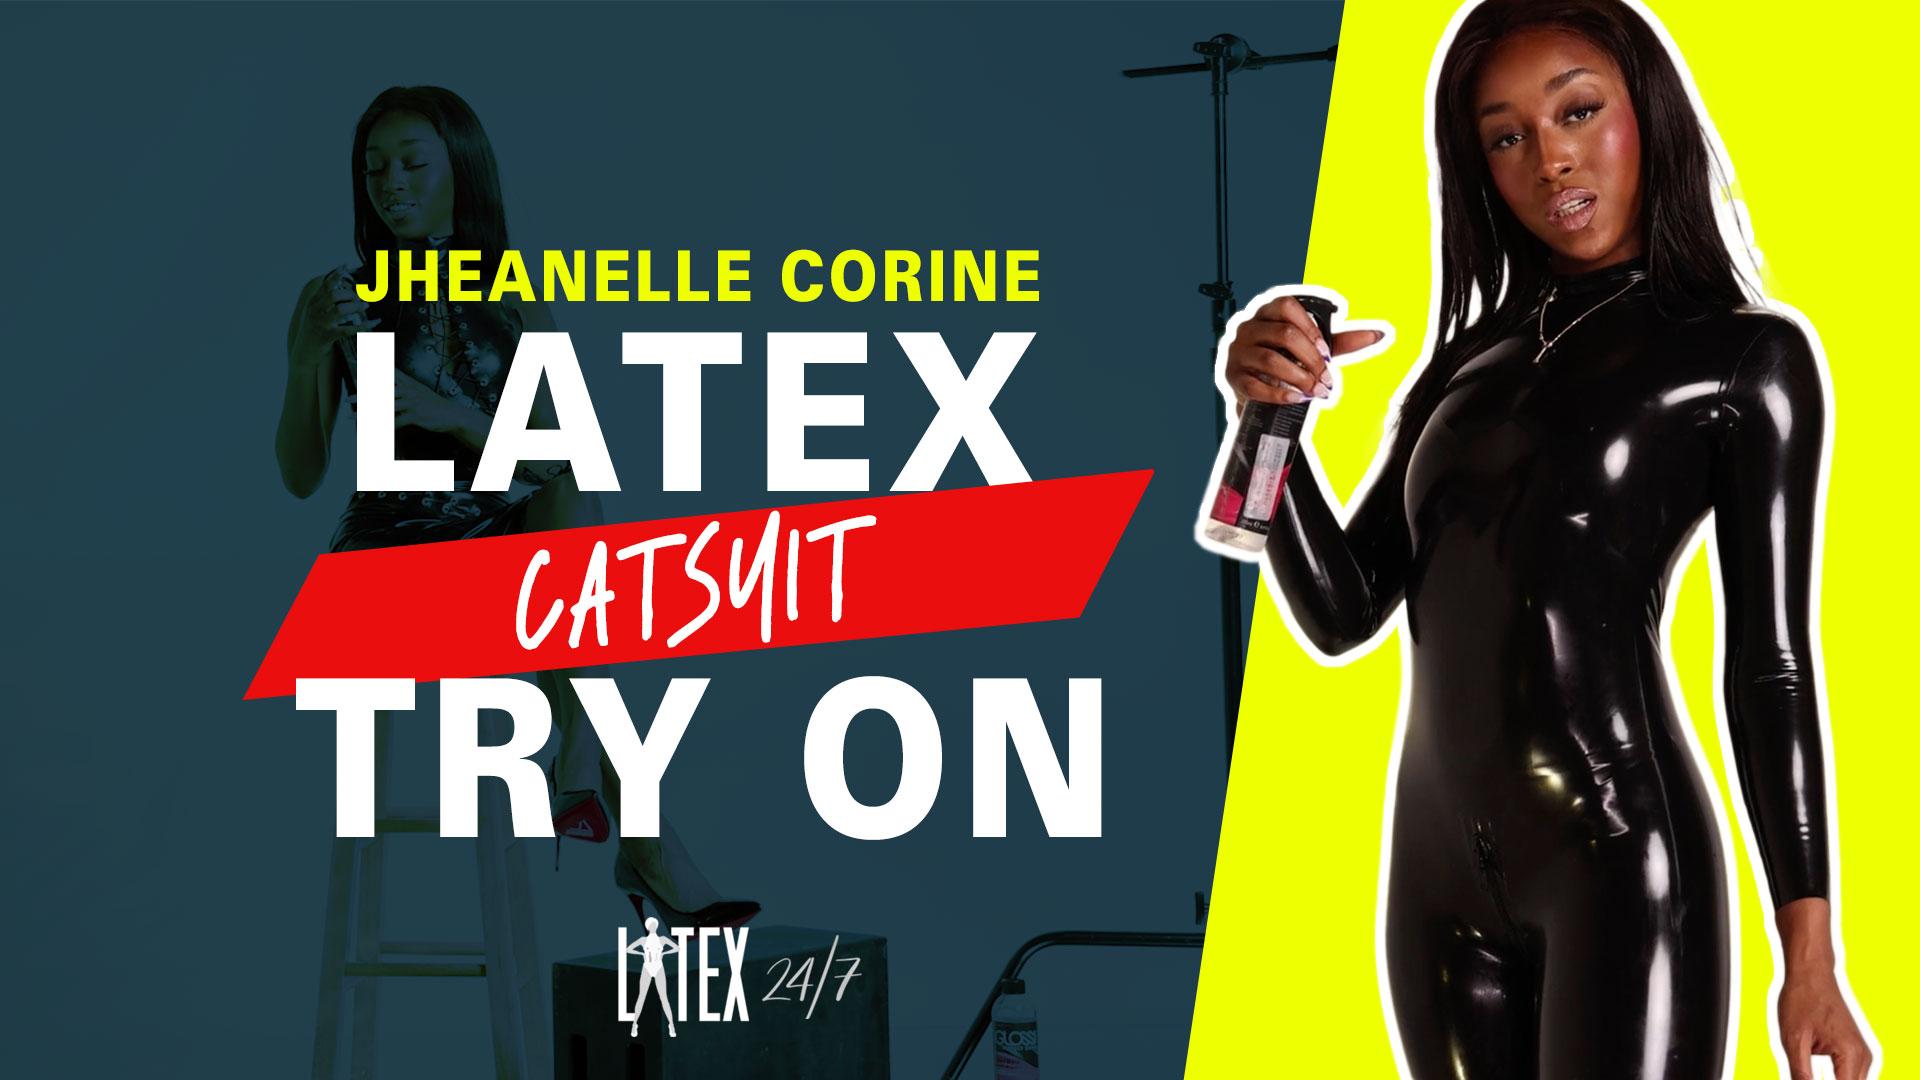 Daring Filmmaker Jheanelle Corine Shines in Skintight Latex Catsuit Try On